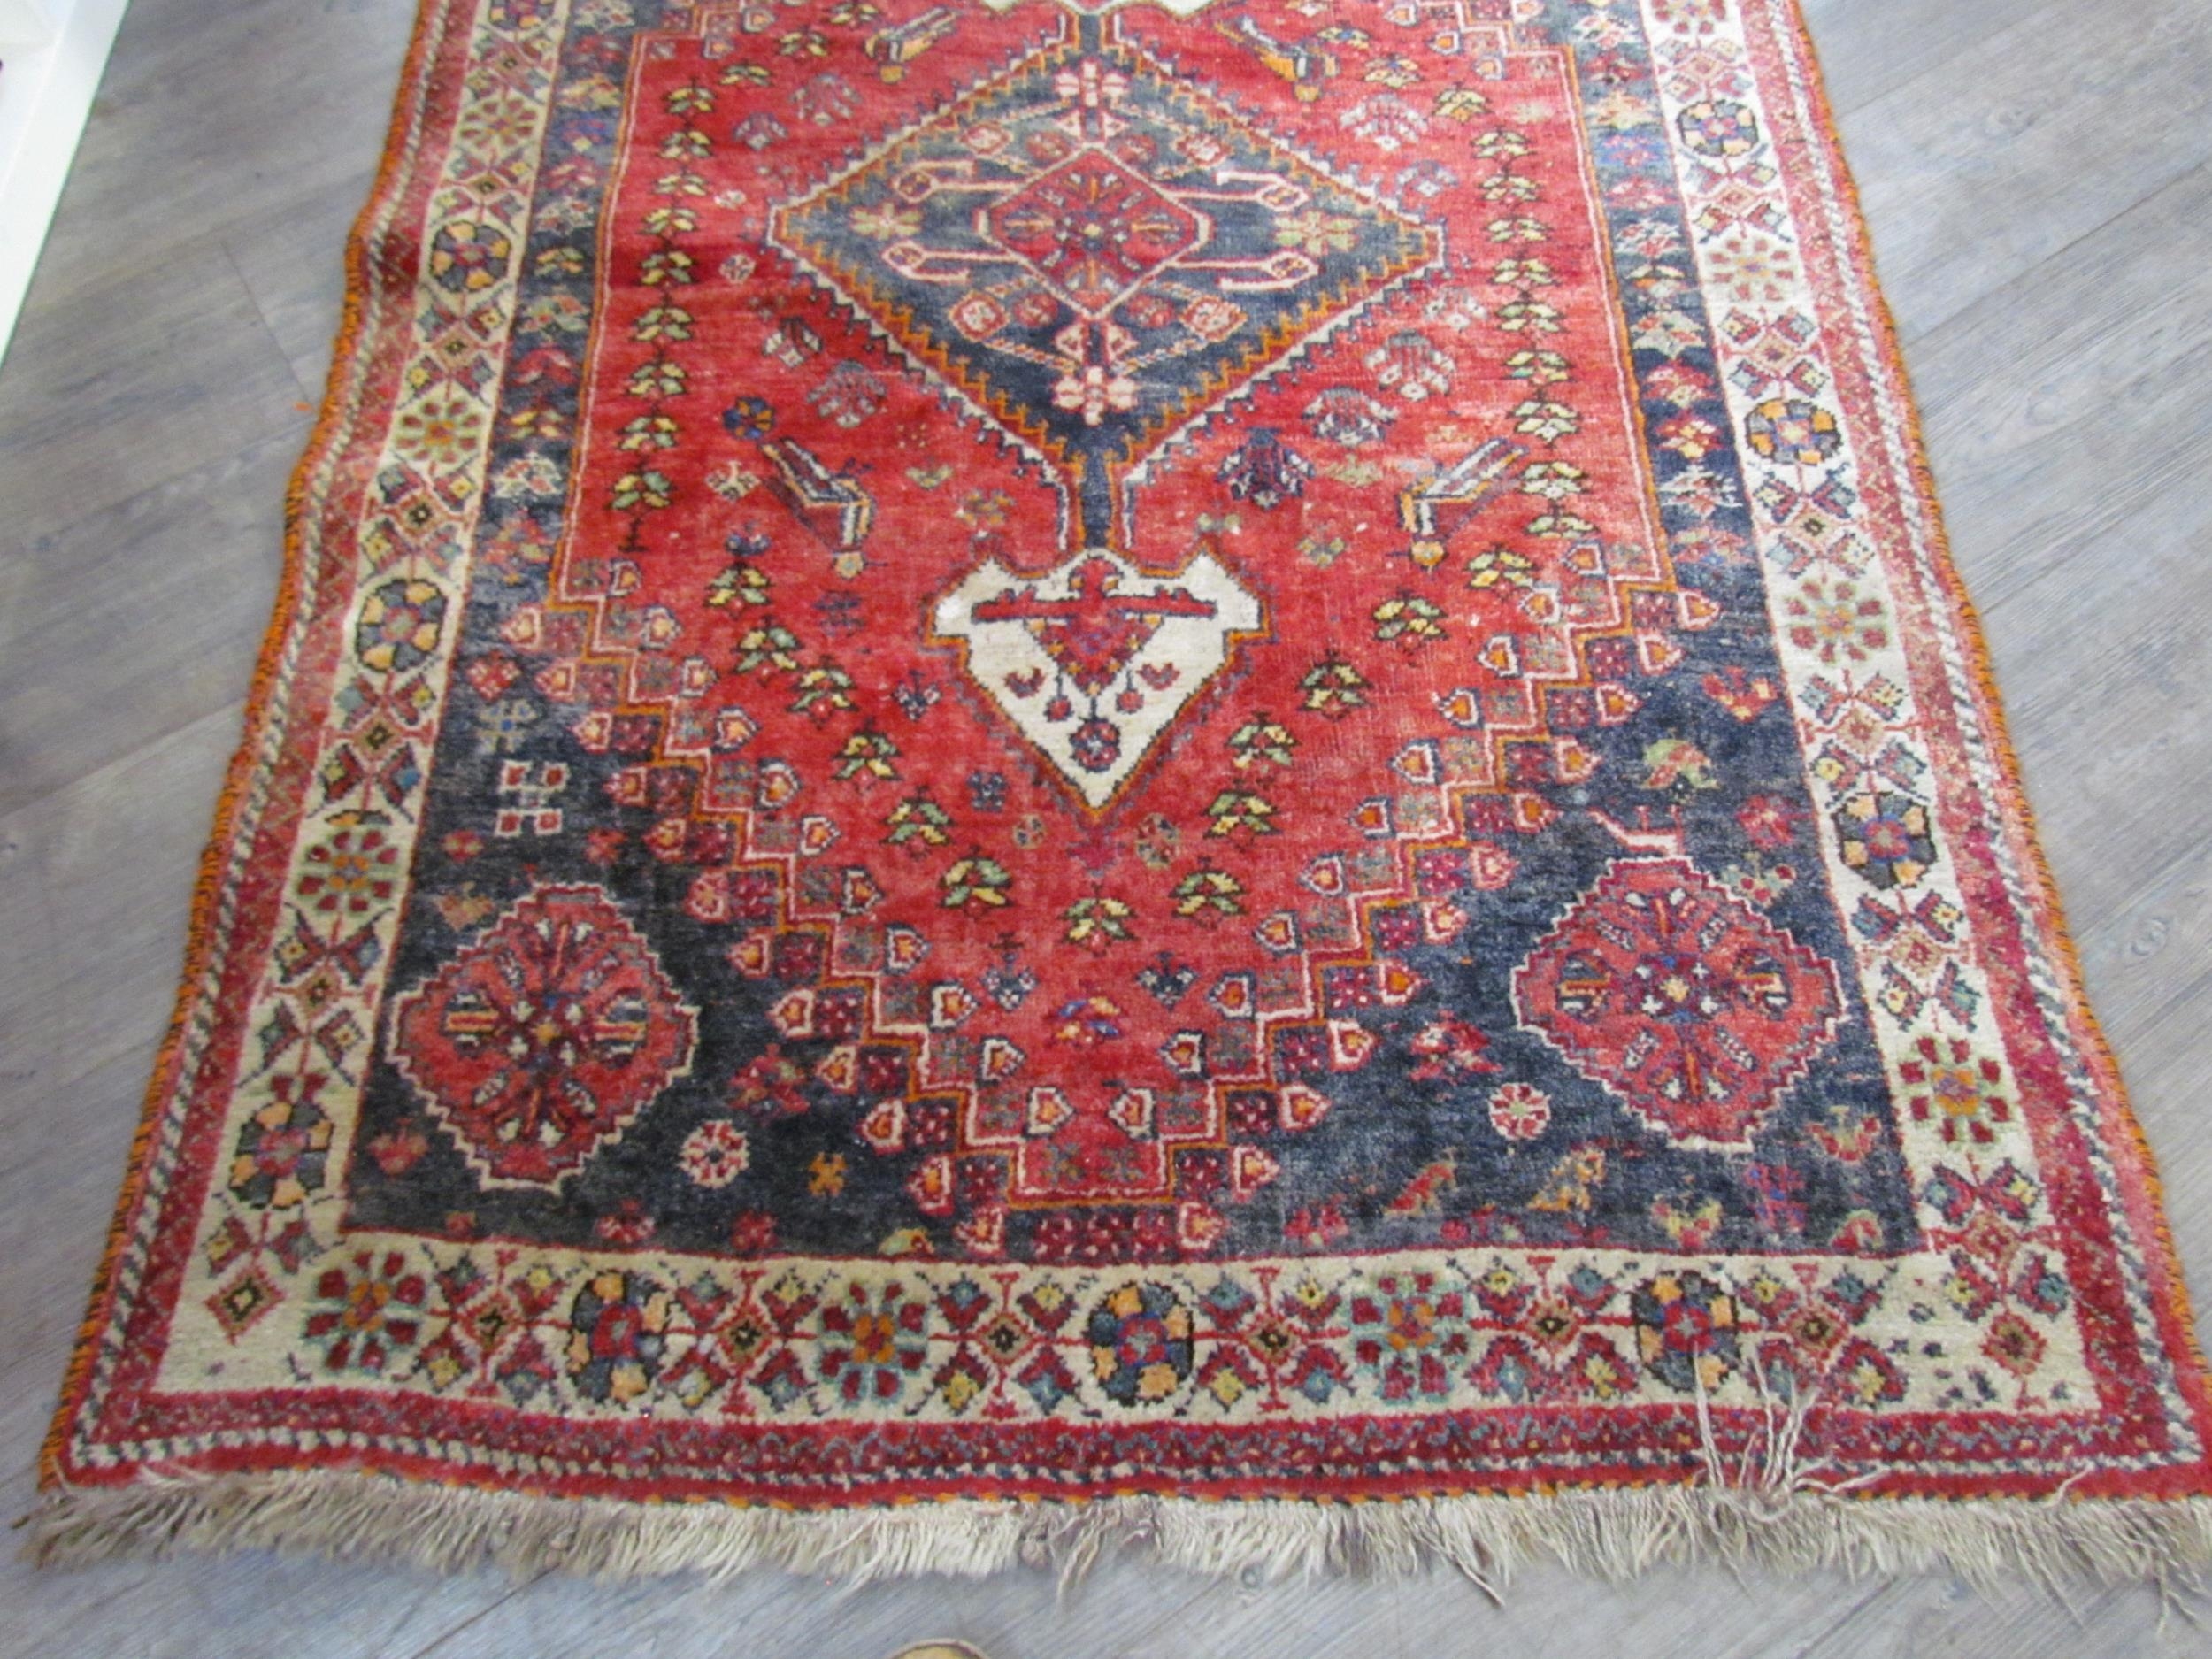 A Persian hand knotted wool rug, red ground with birds and floral borders, 155cm x 115cm - Image 3 of 7